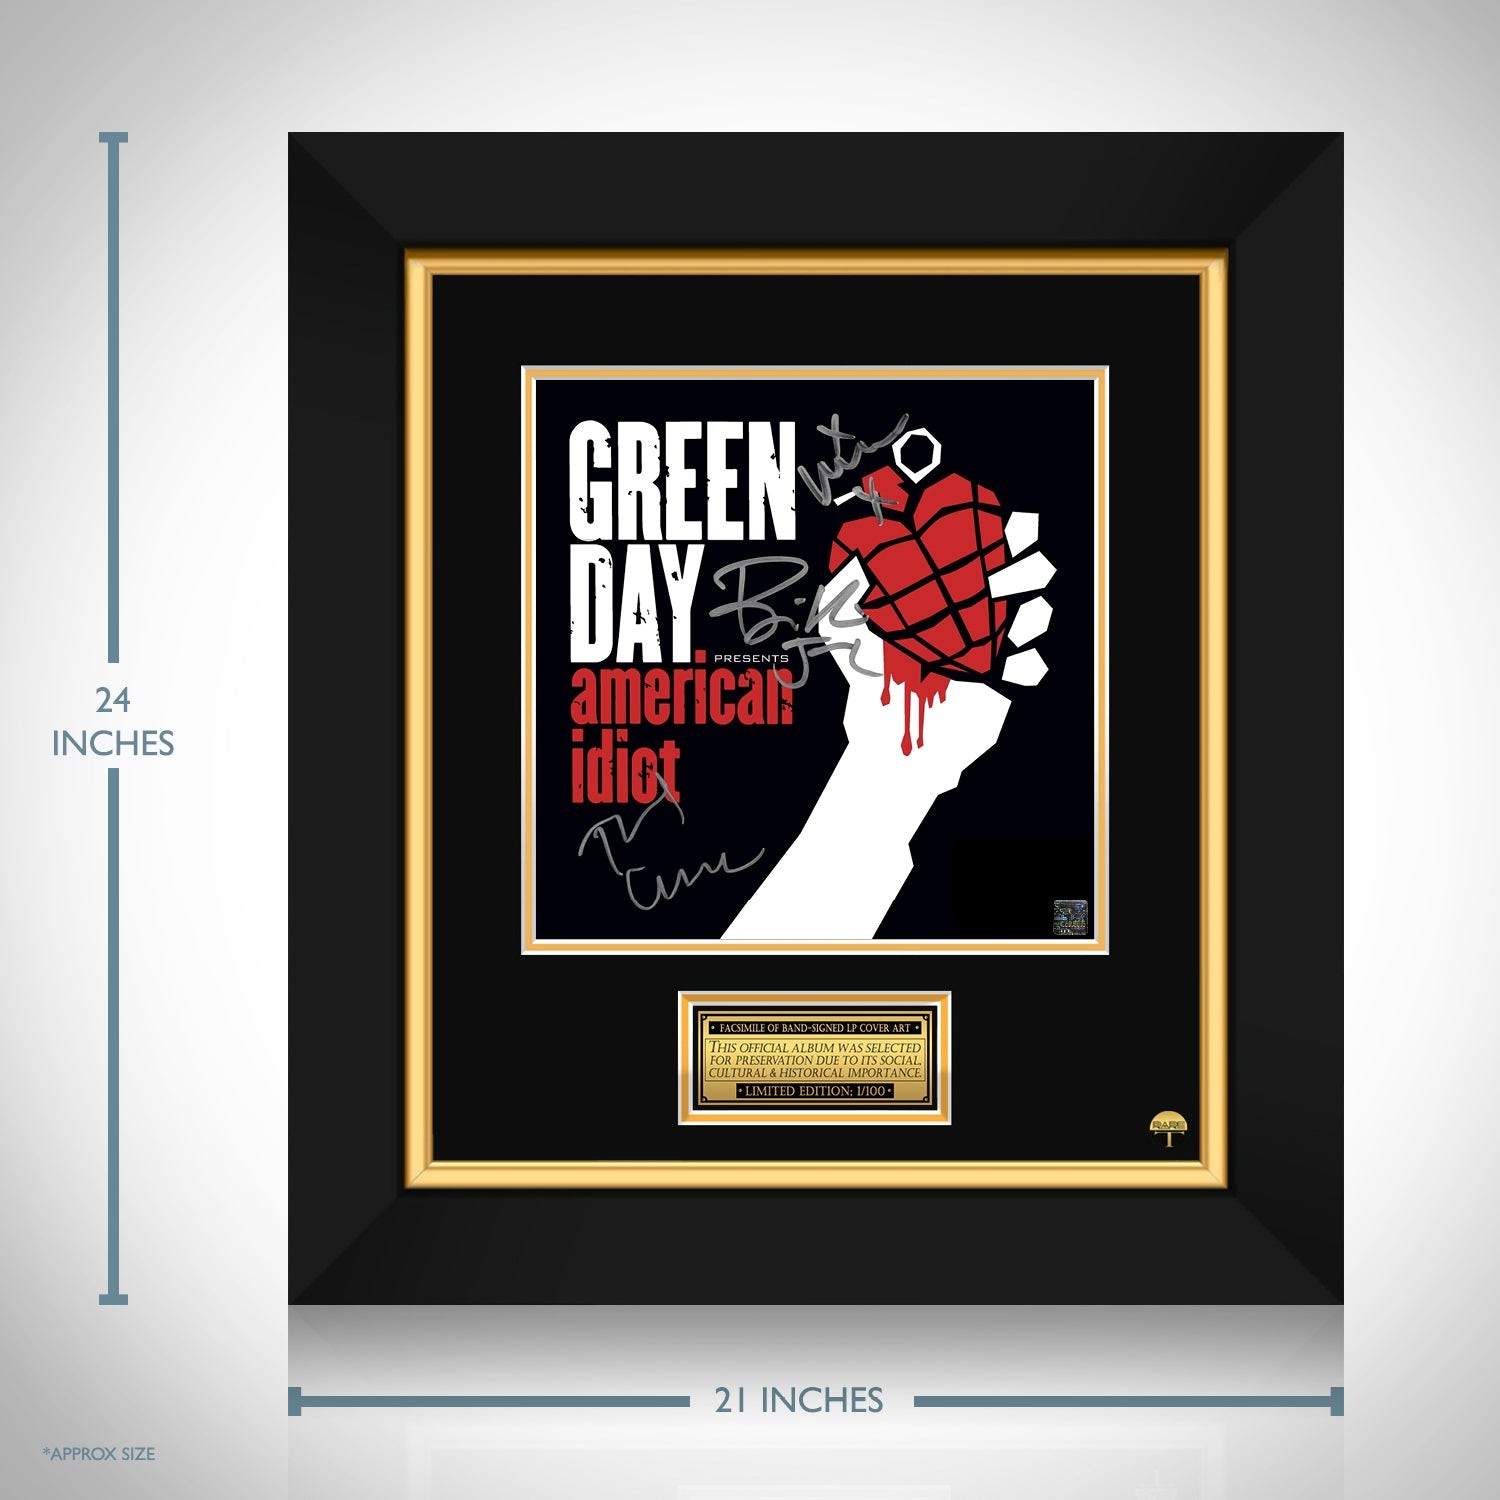 Green Day - American Idiot Framed Signature Gold LP Record Display M4 -  Gold Record Outlet Album and Disc Collectible Memorabilia